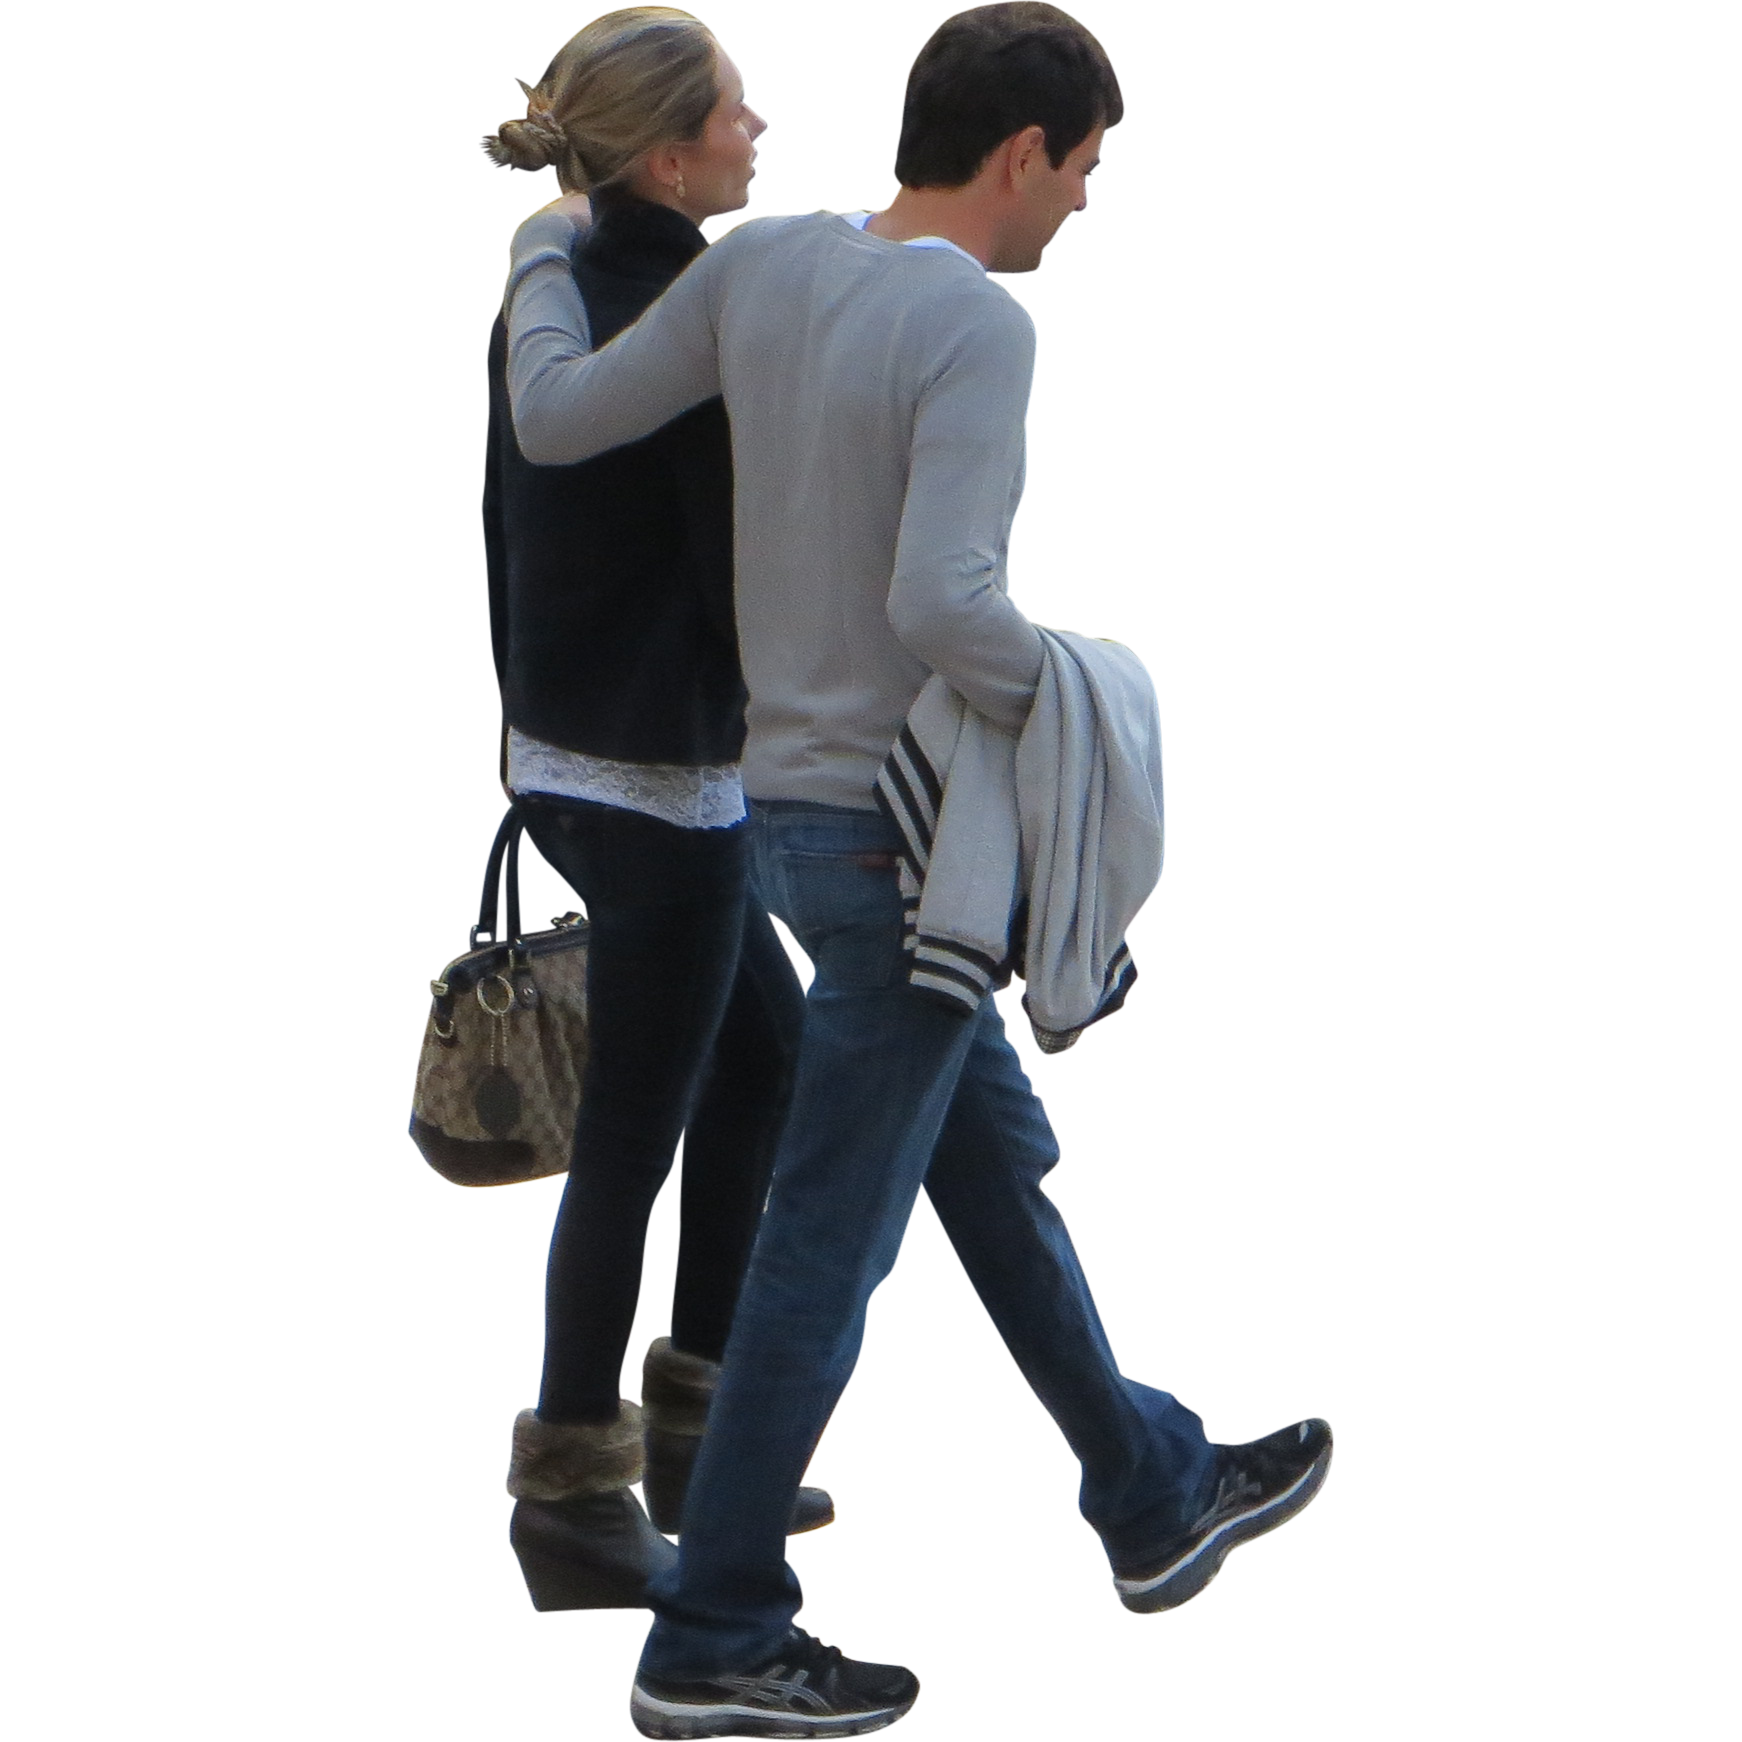 Walking People Png   Google Search - People, Transparent background PNG HD thumbnail